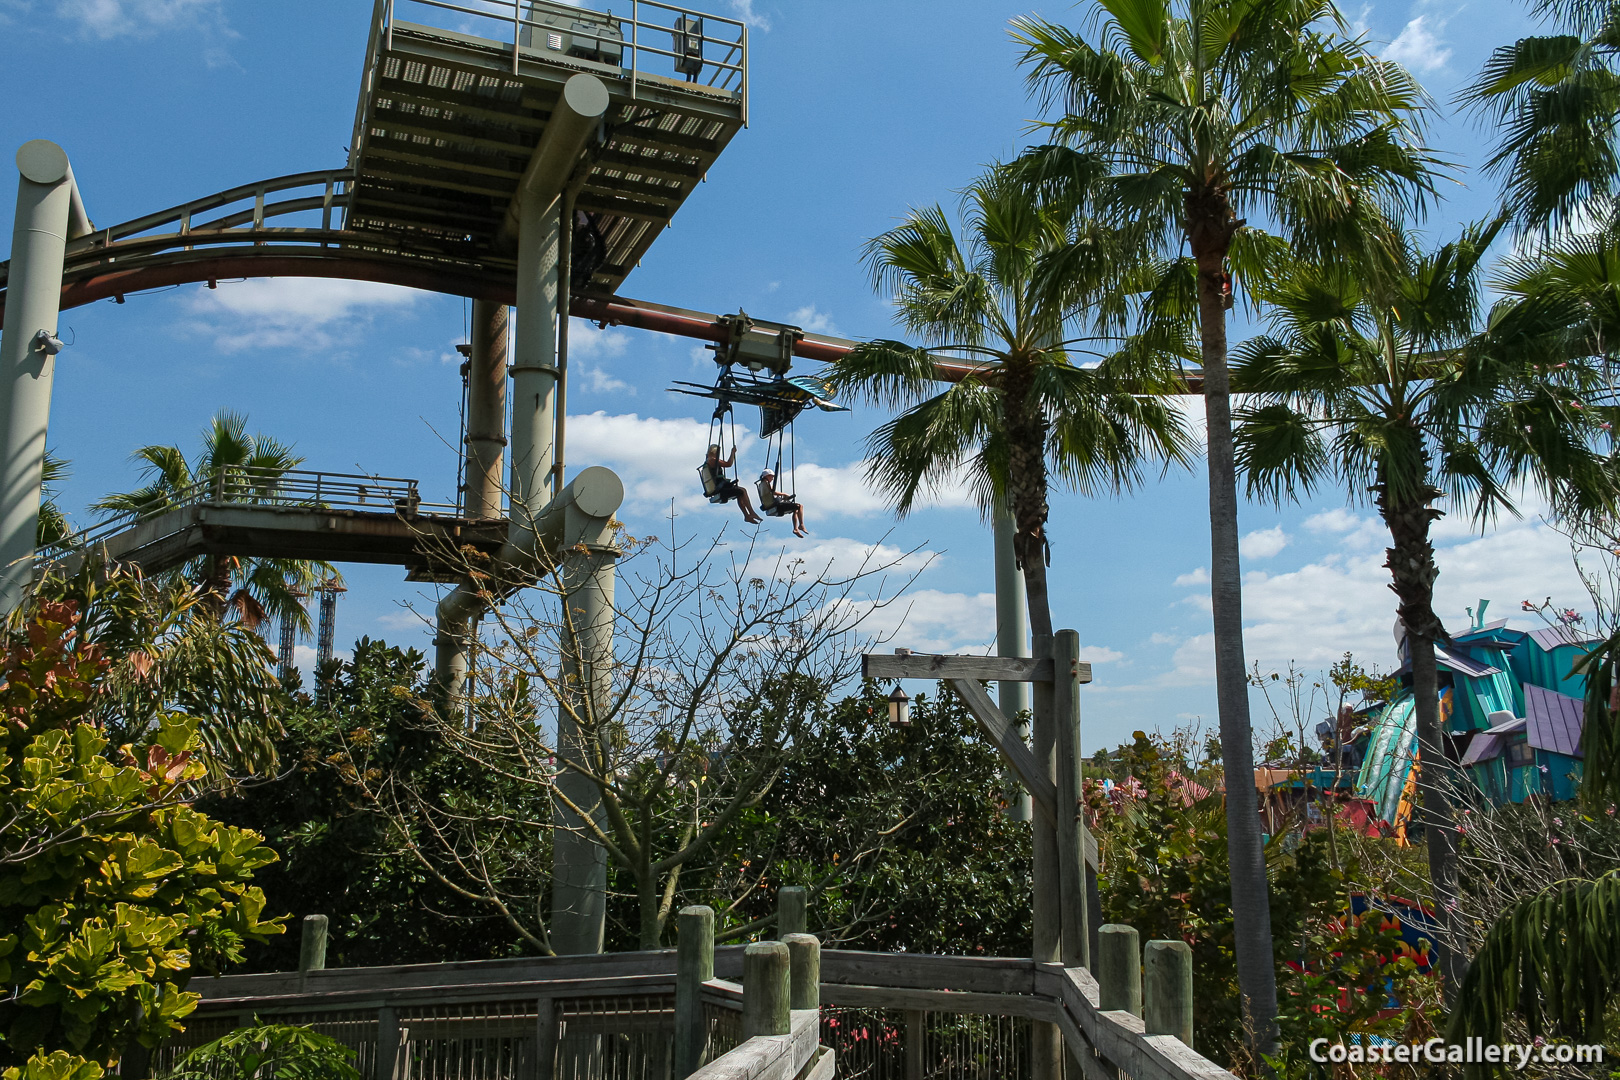 Pteranodon Flyers suspended coaster at Islands of Adventure